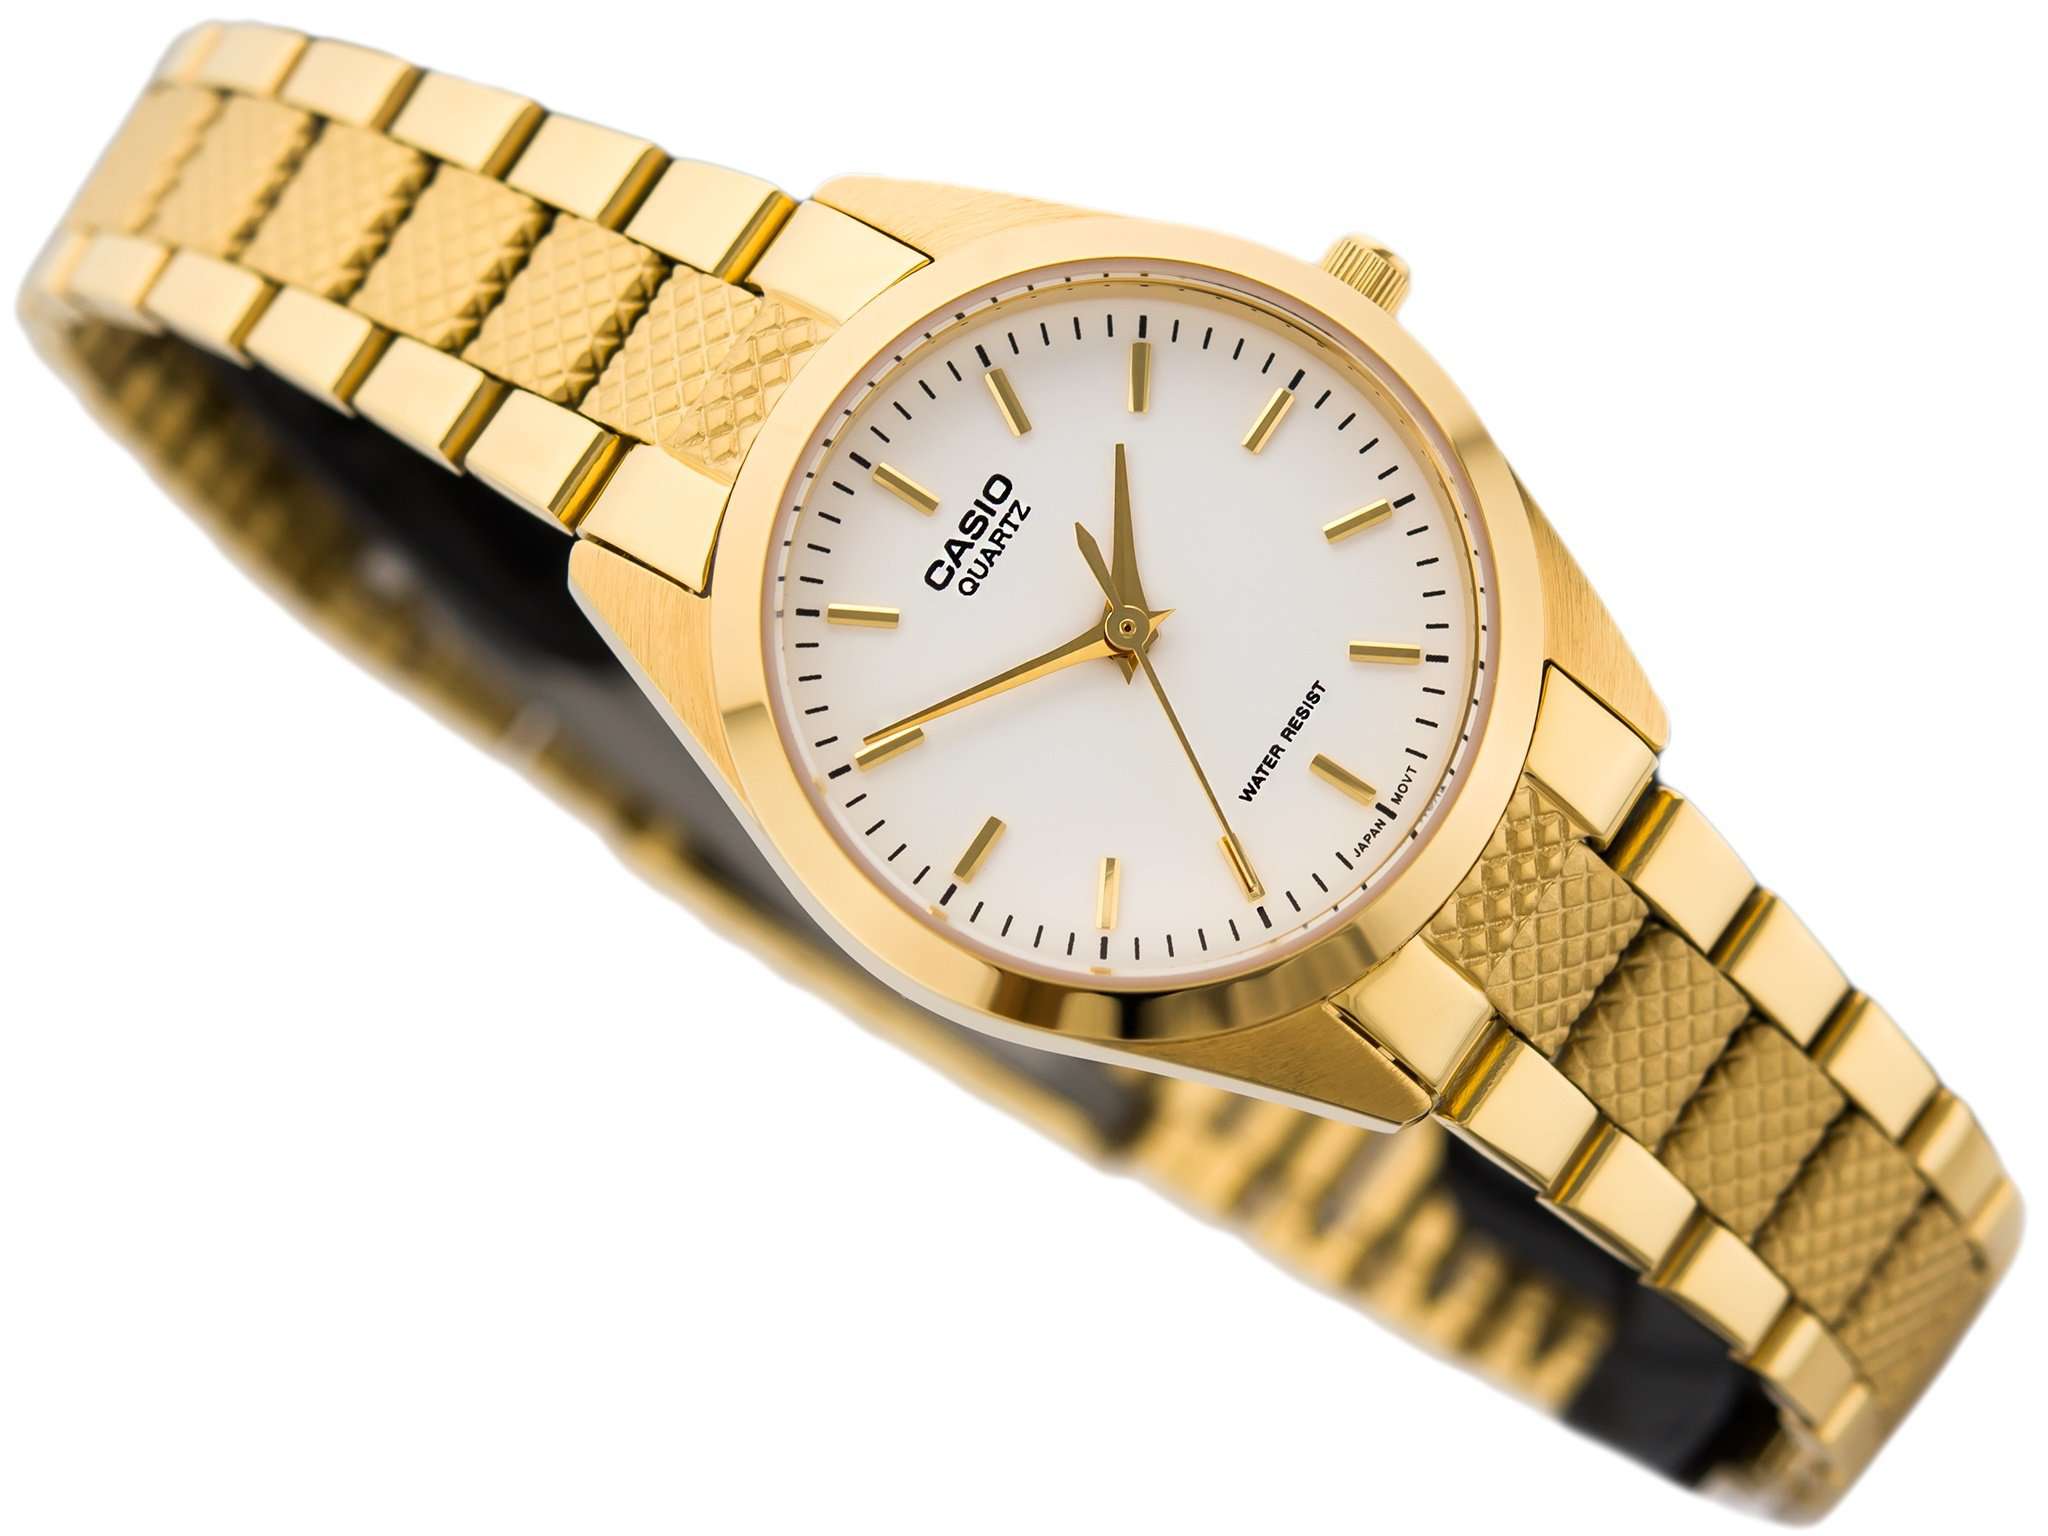 Casio LTP-1274G-7A Gold Plated Stainless Steel Watch for Women-Watch Portal Philippines